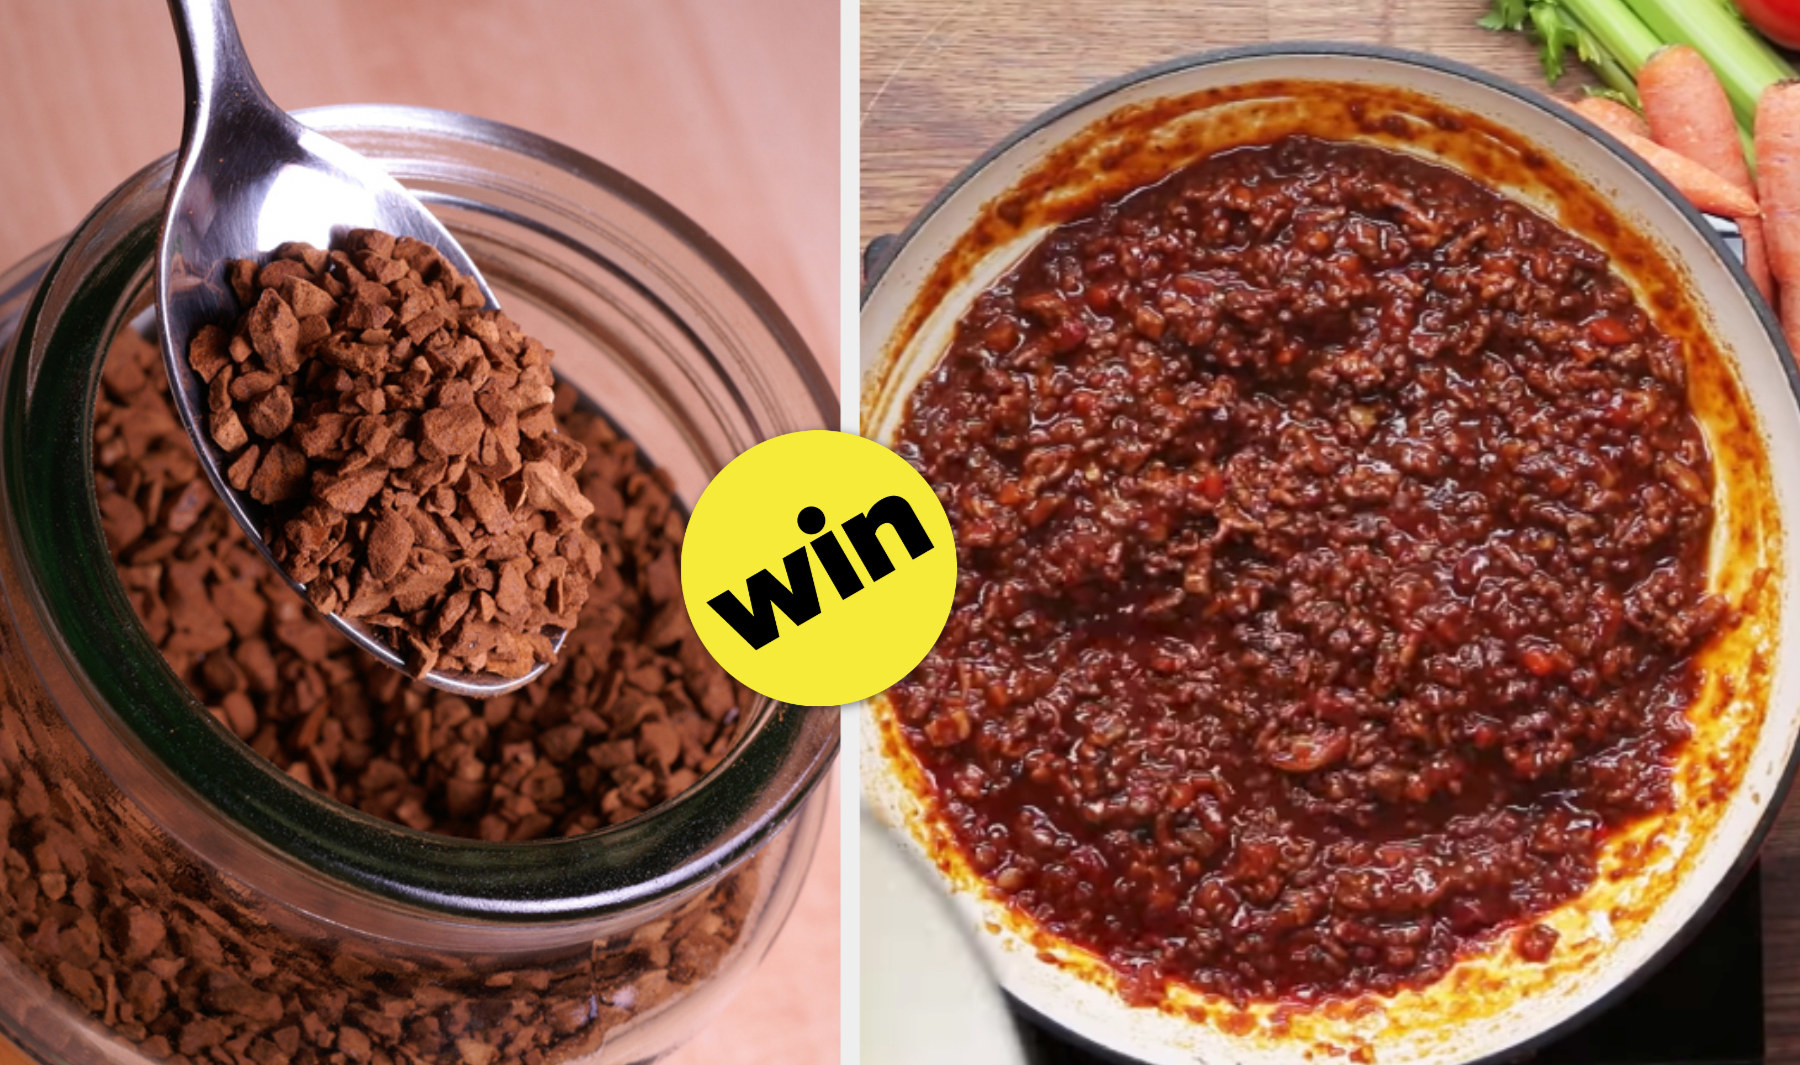 A jar of instant coffee with a spoon; a bowl of fresh bolognese sauce